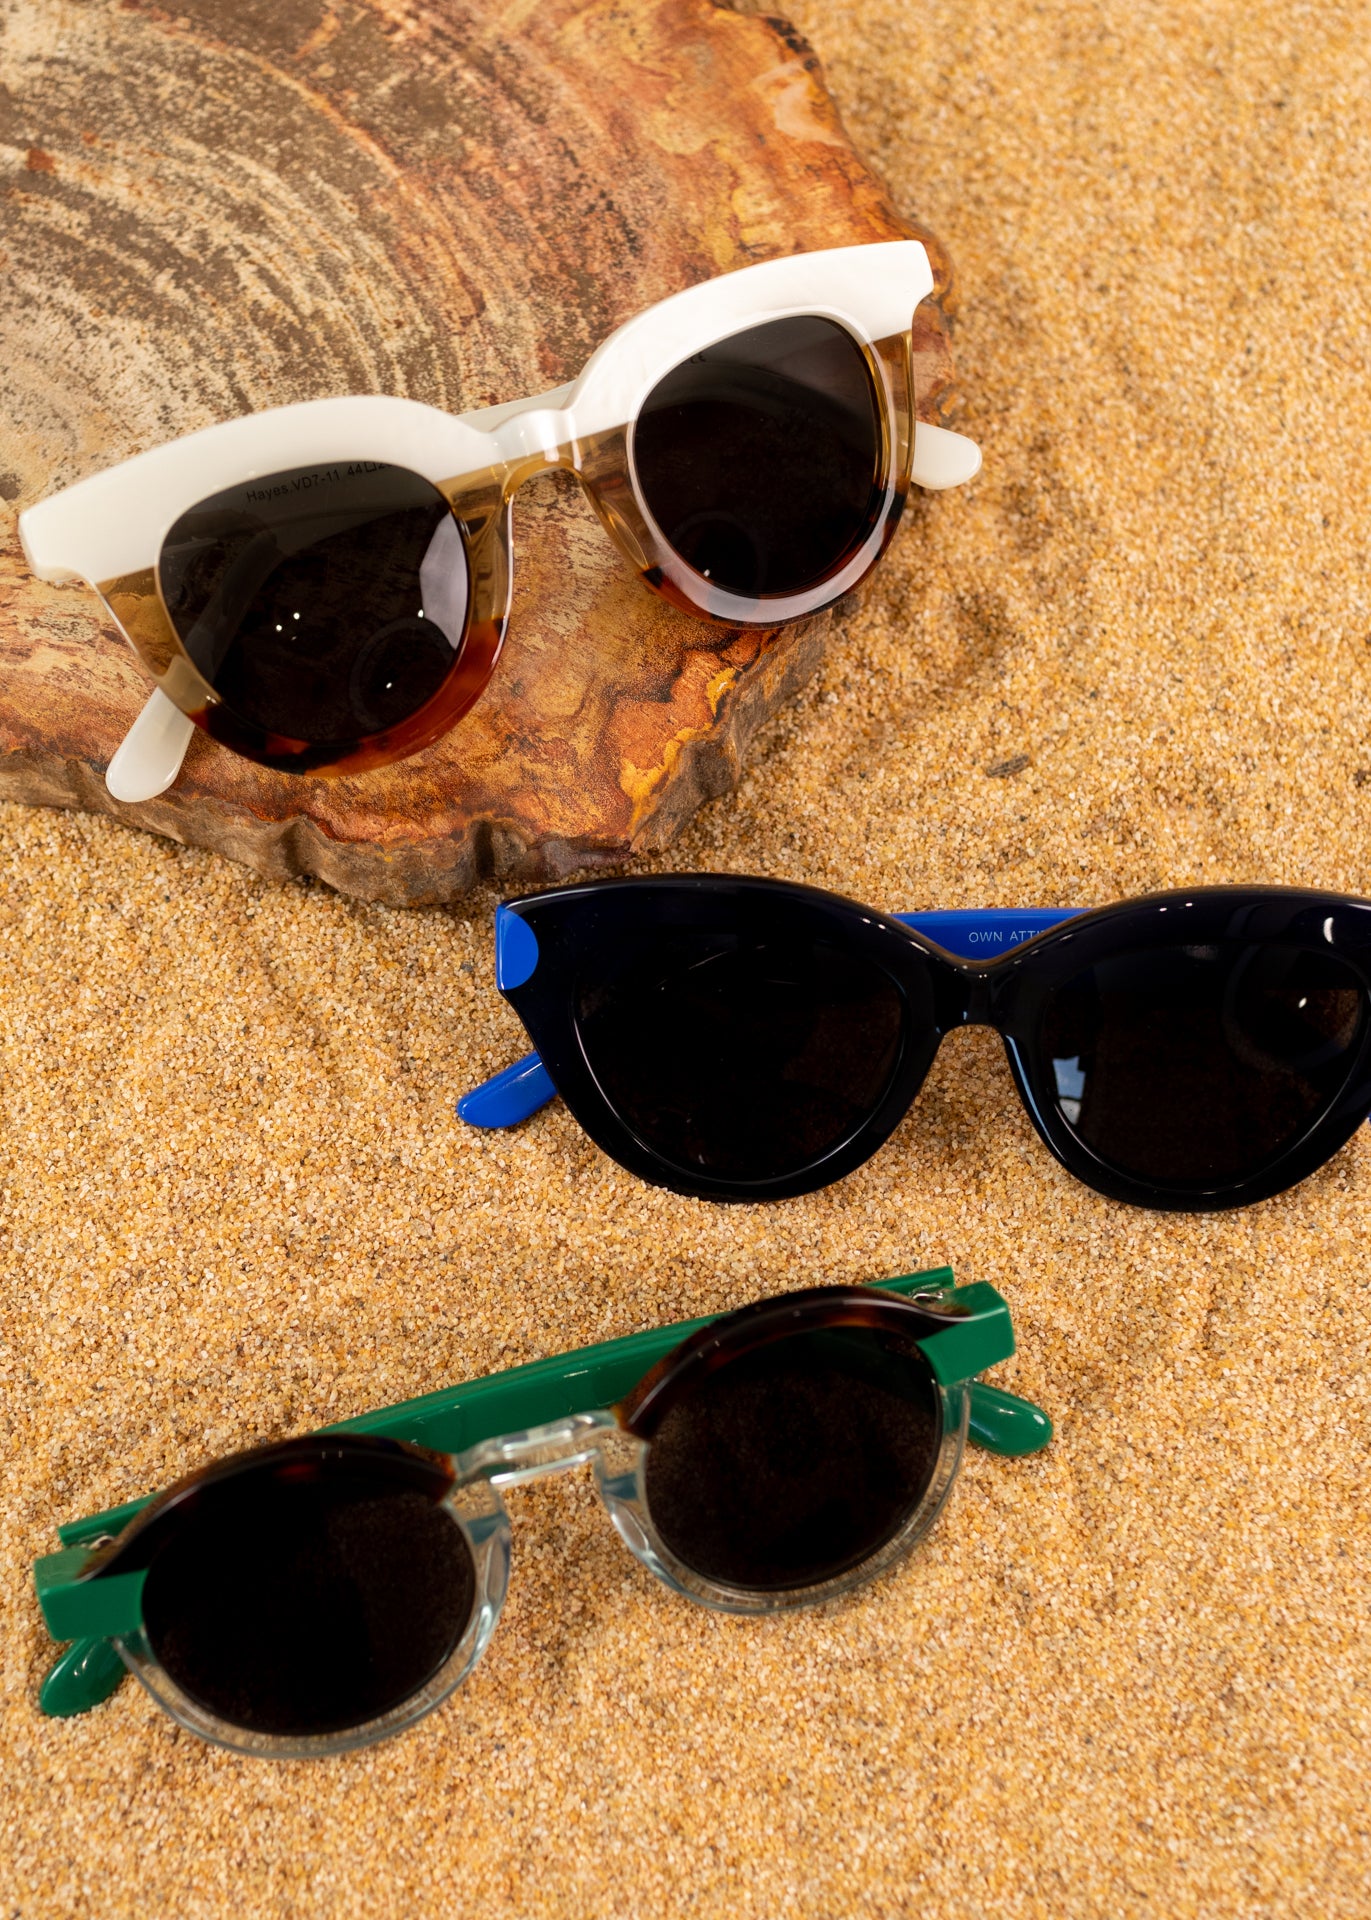 A photo of three types sunglasses in multiple colors folded on some sand &amp; a tan rock piece